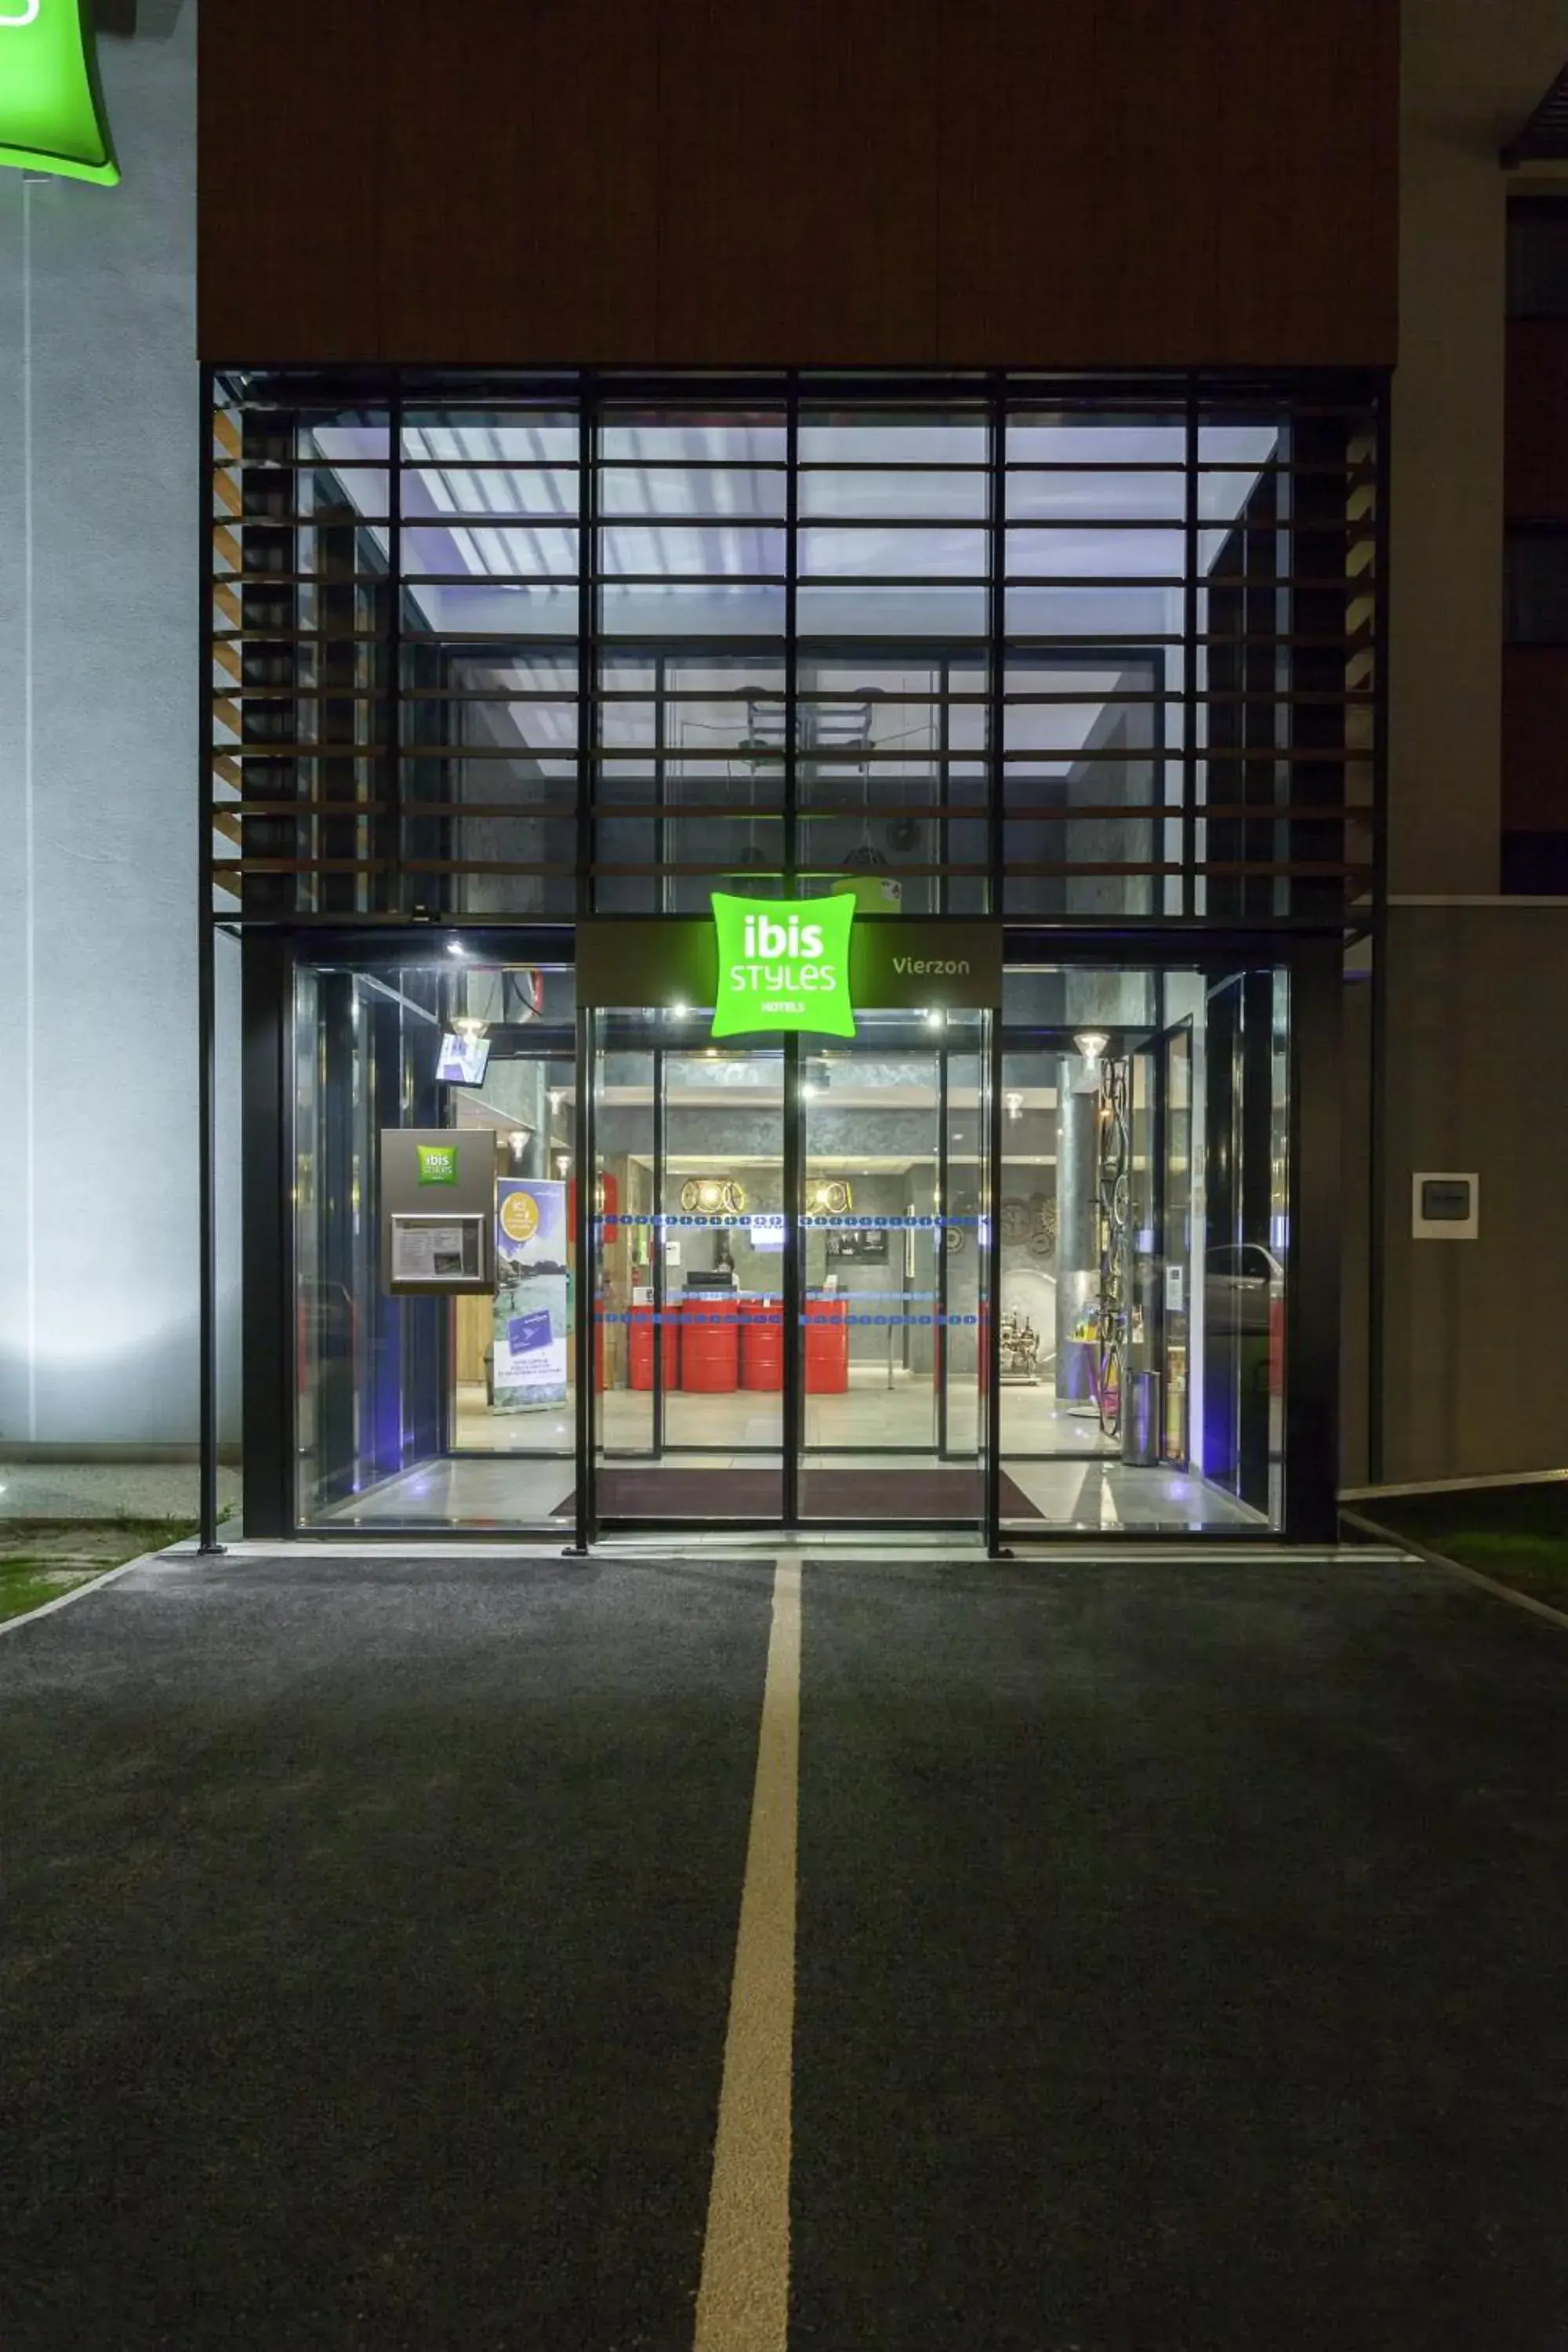 Property building in Ibis Styles Vierzon